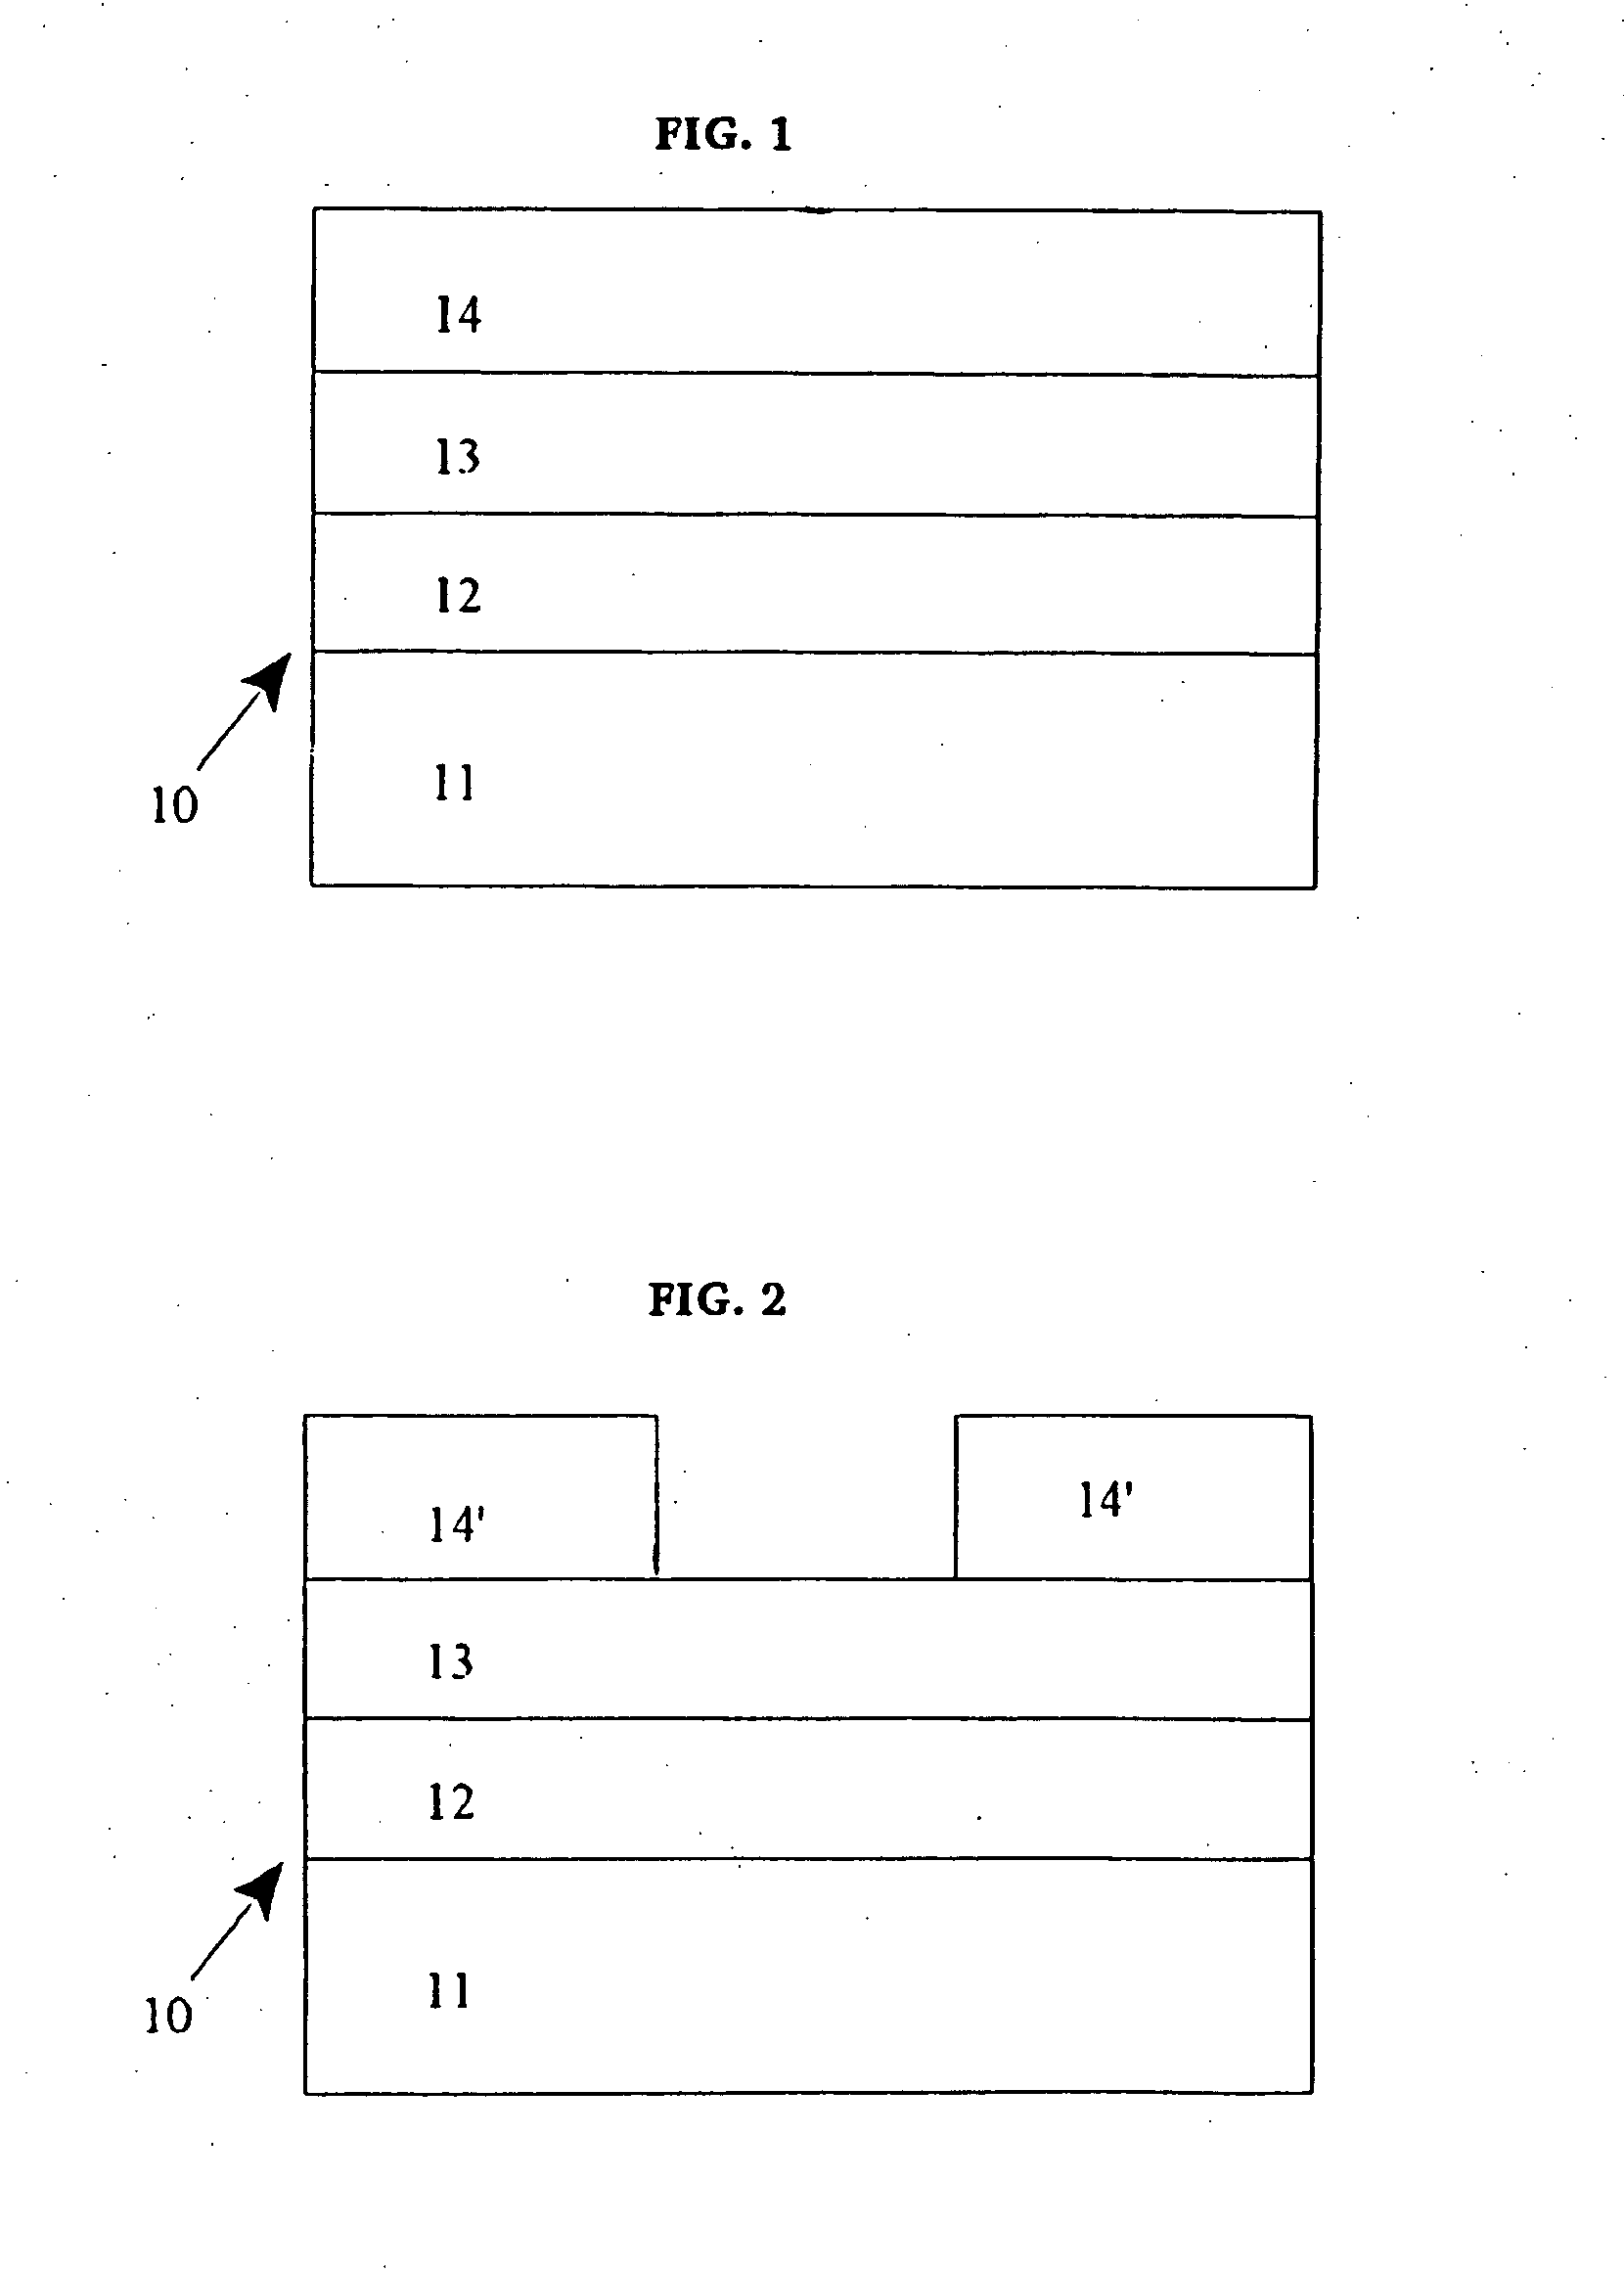 Rule based system and method for automatically generating photomask orders by conditioning information from a customer's computer system